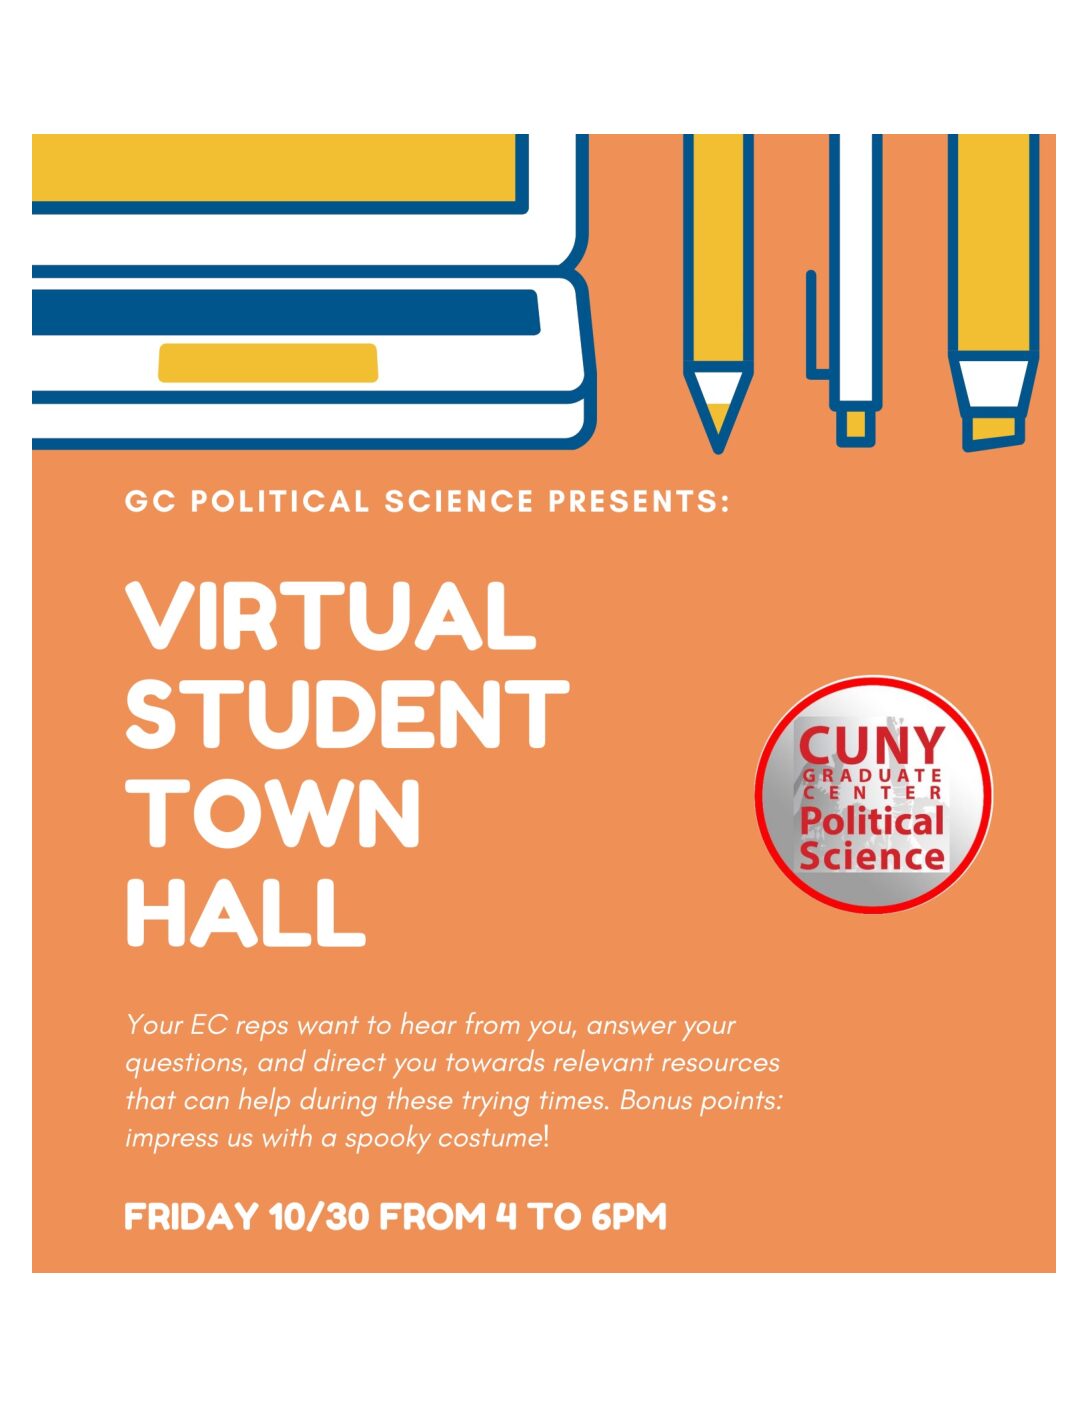 Virtual Student Town Hall: Friday, October 30, 4-6pm